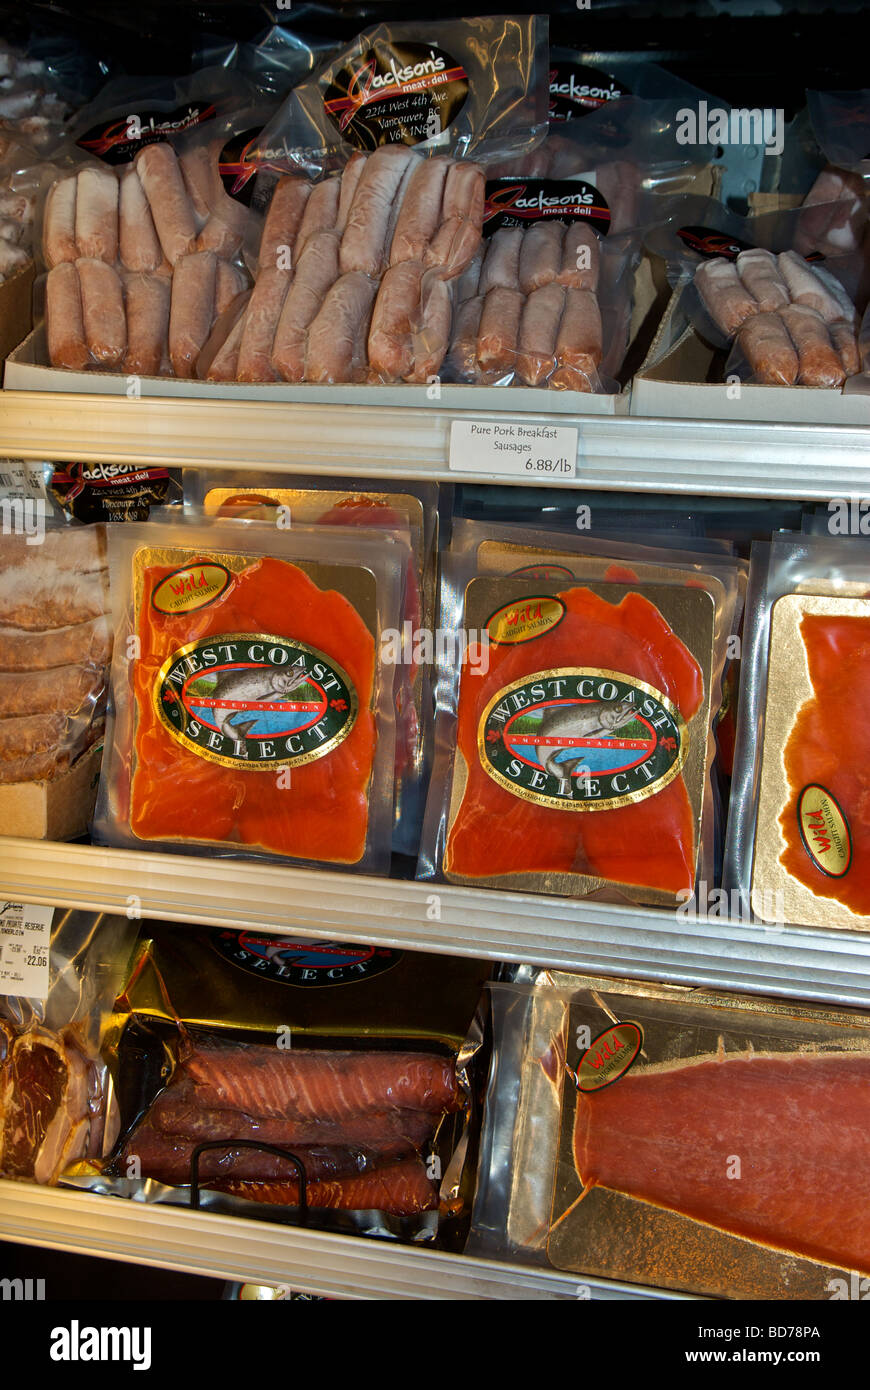 Specialty frozen sausages and smoked salmon in upright freezer display case Stock Photo